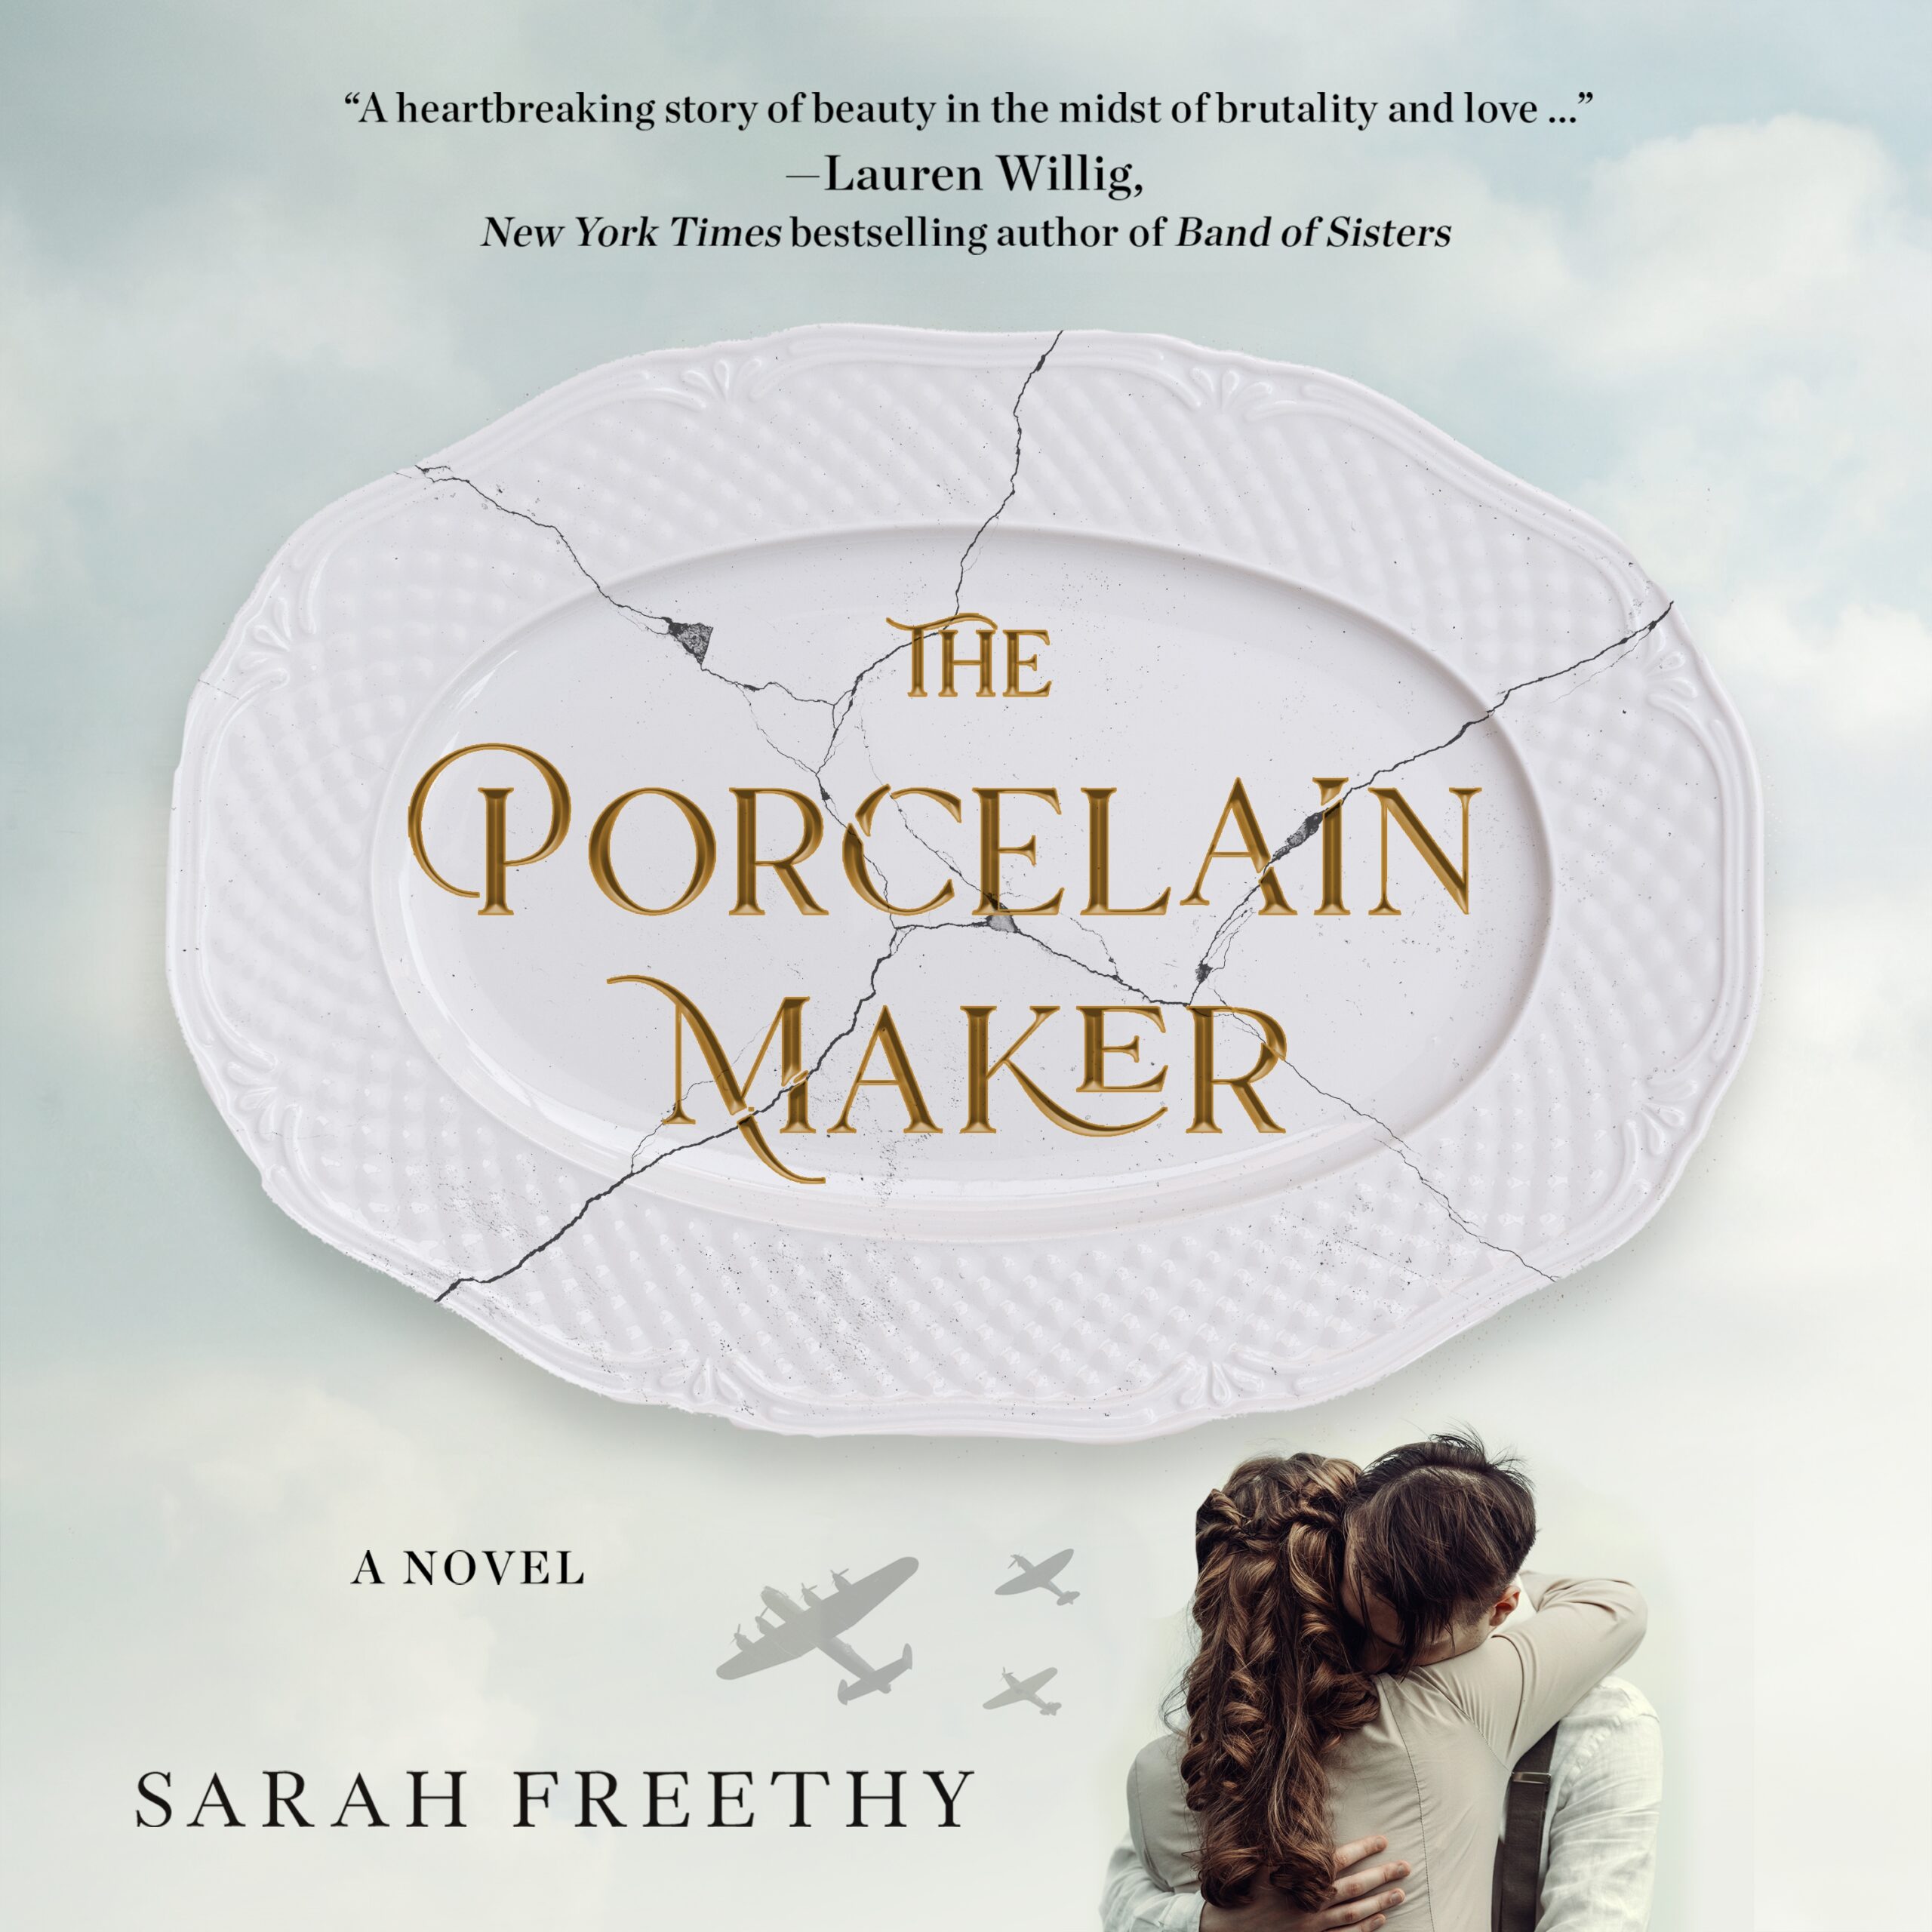 One of our recommended books is The Porcelain Maker by Sarah Freethy